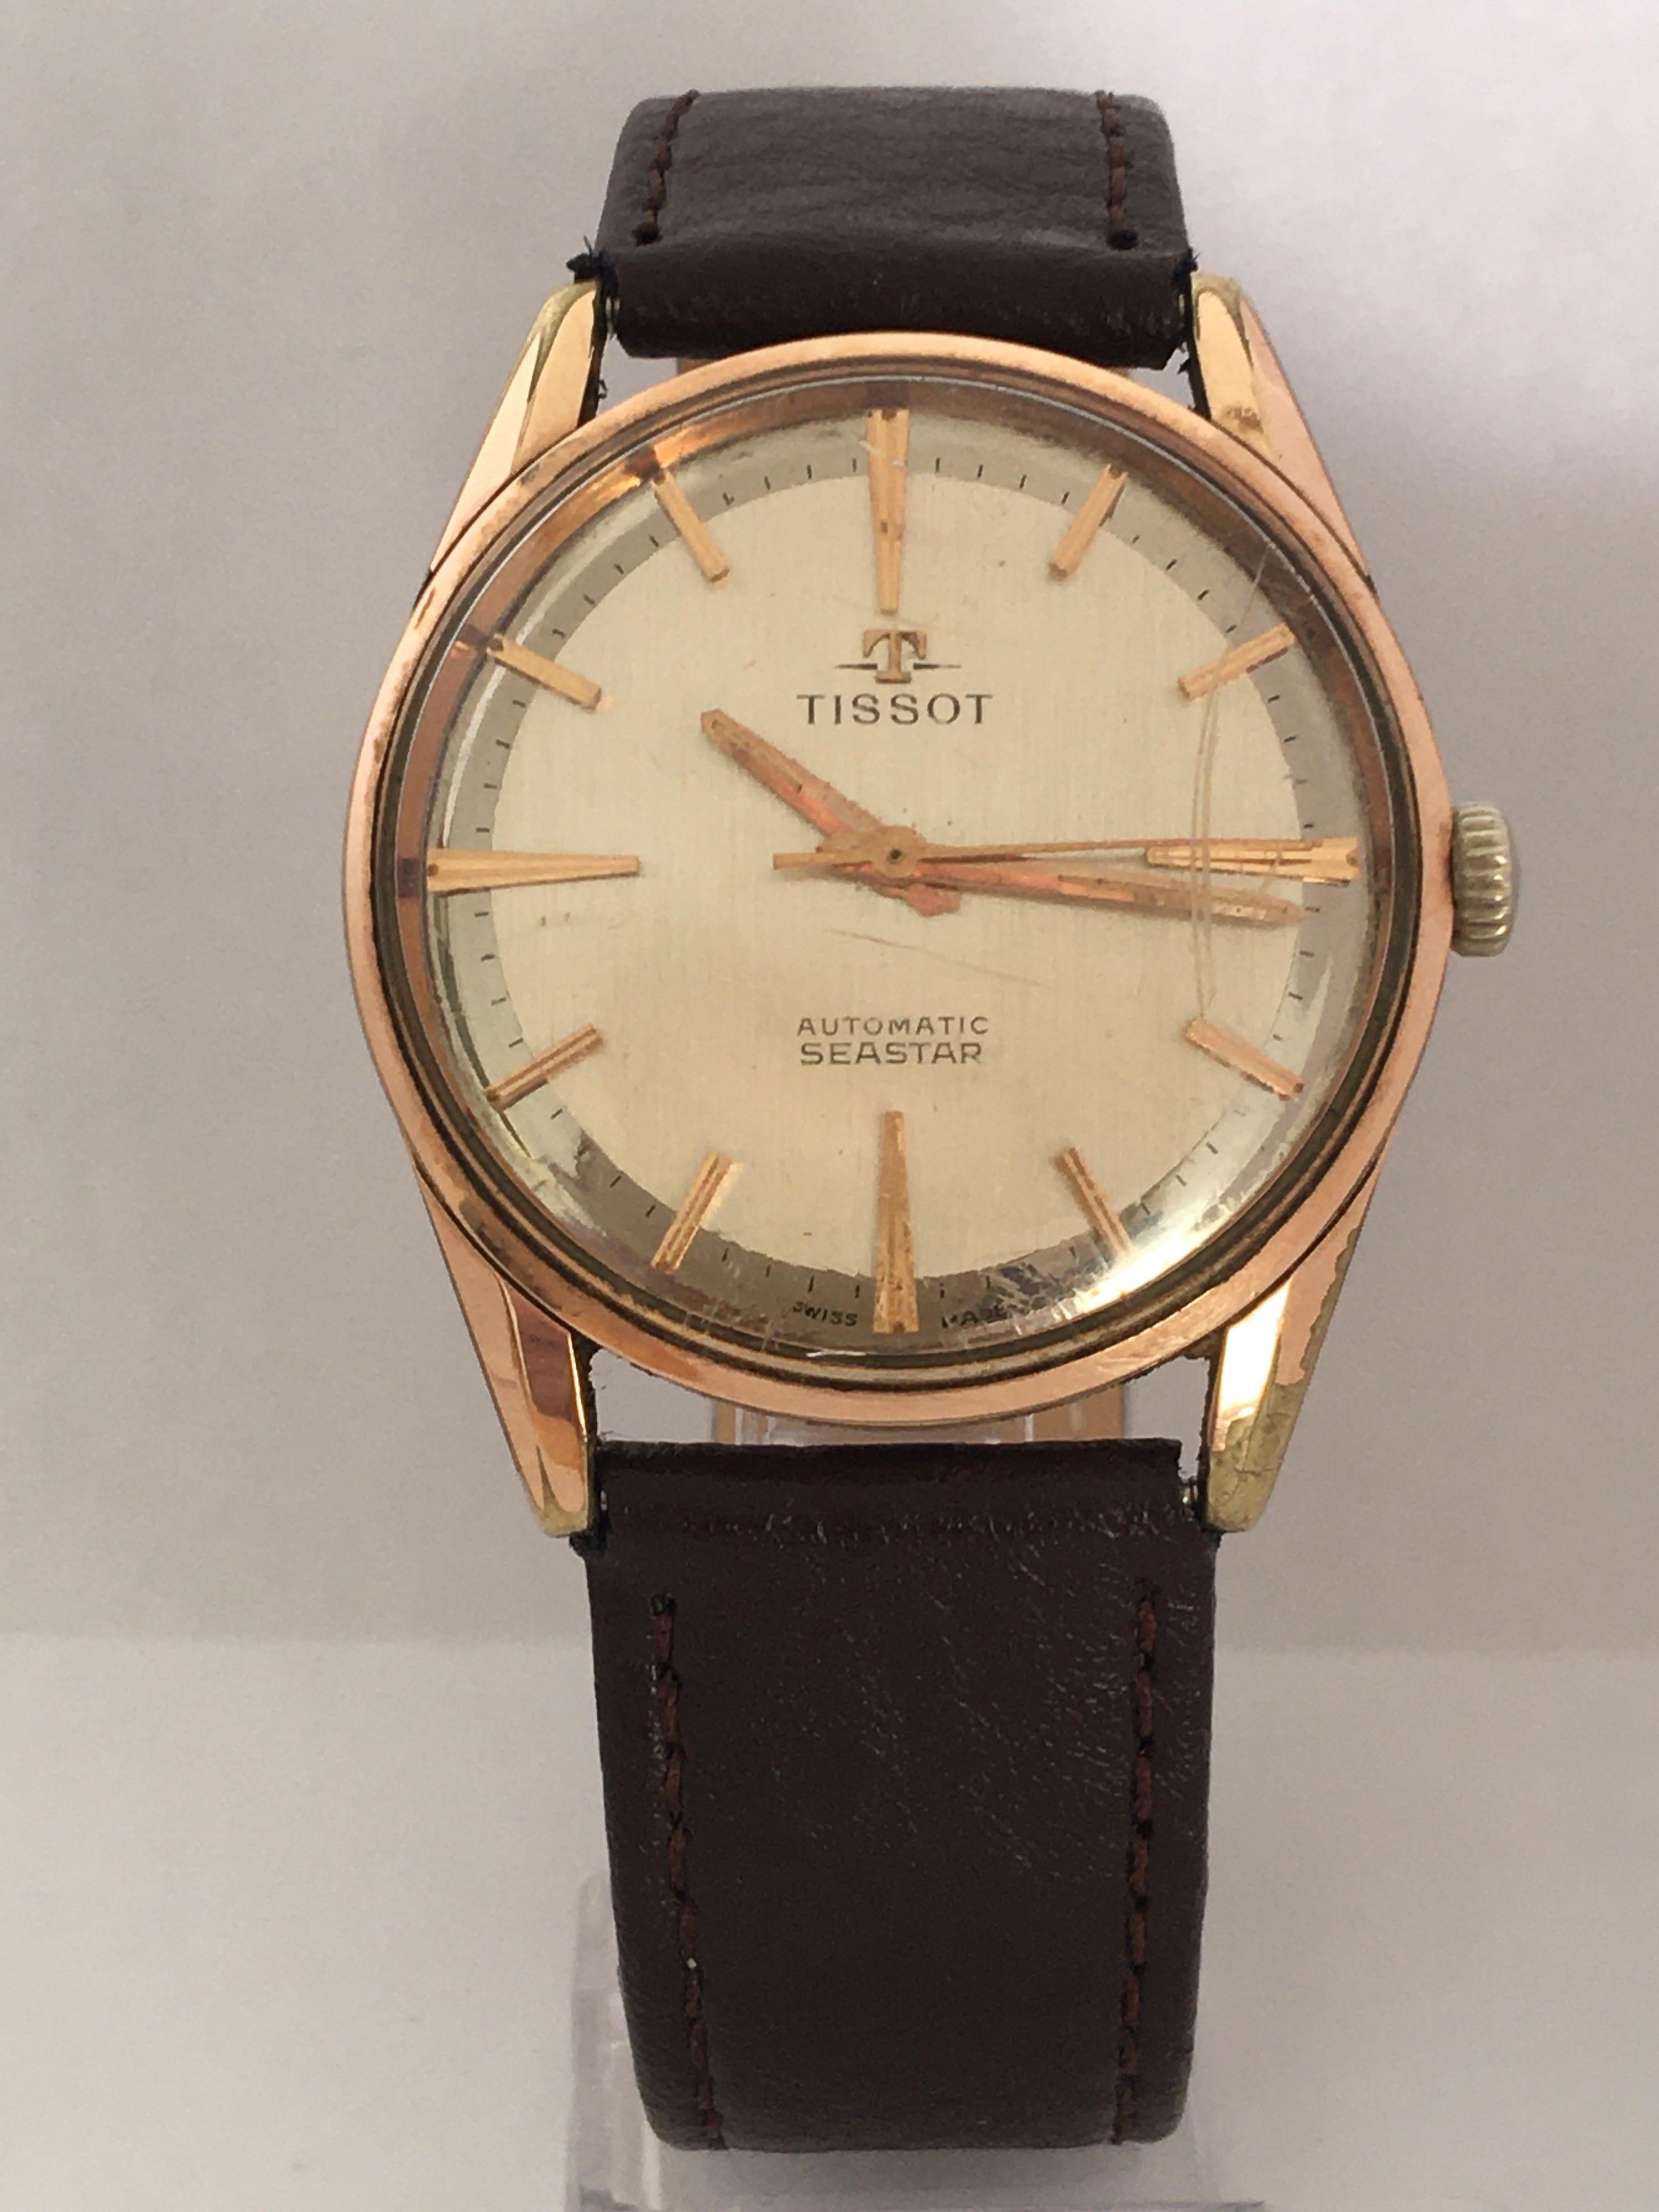 This beautiful vintage mechanical Swiss Watch is in good working conditionand it is ticking well. It has some signs of wear and ageing with the gold plated case has some tarnished as well as the winder. Visible scratches on the glass as shown.